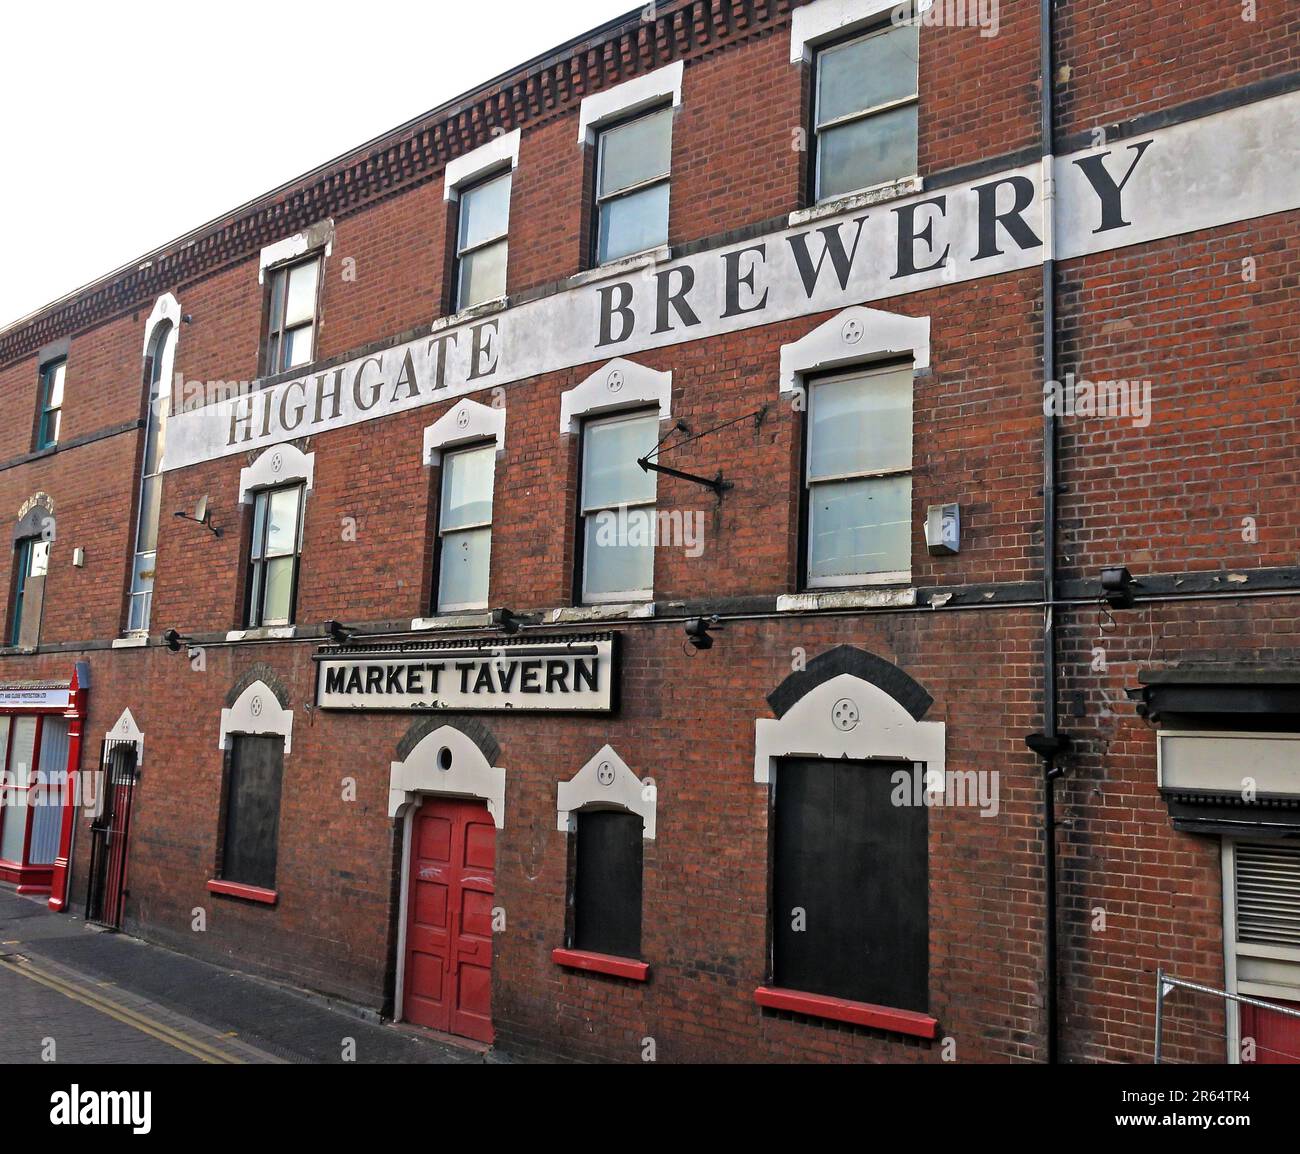 The Market Tavern, Highgate Brewery Building, à l'angle de George Street, Walsall, West Midlands, Angleterre, Royaume-Uni, WS1 1QR Banque D'Images